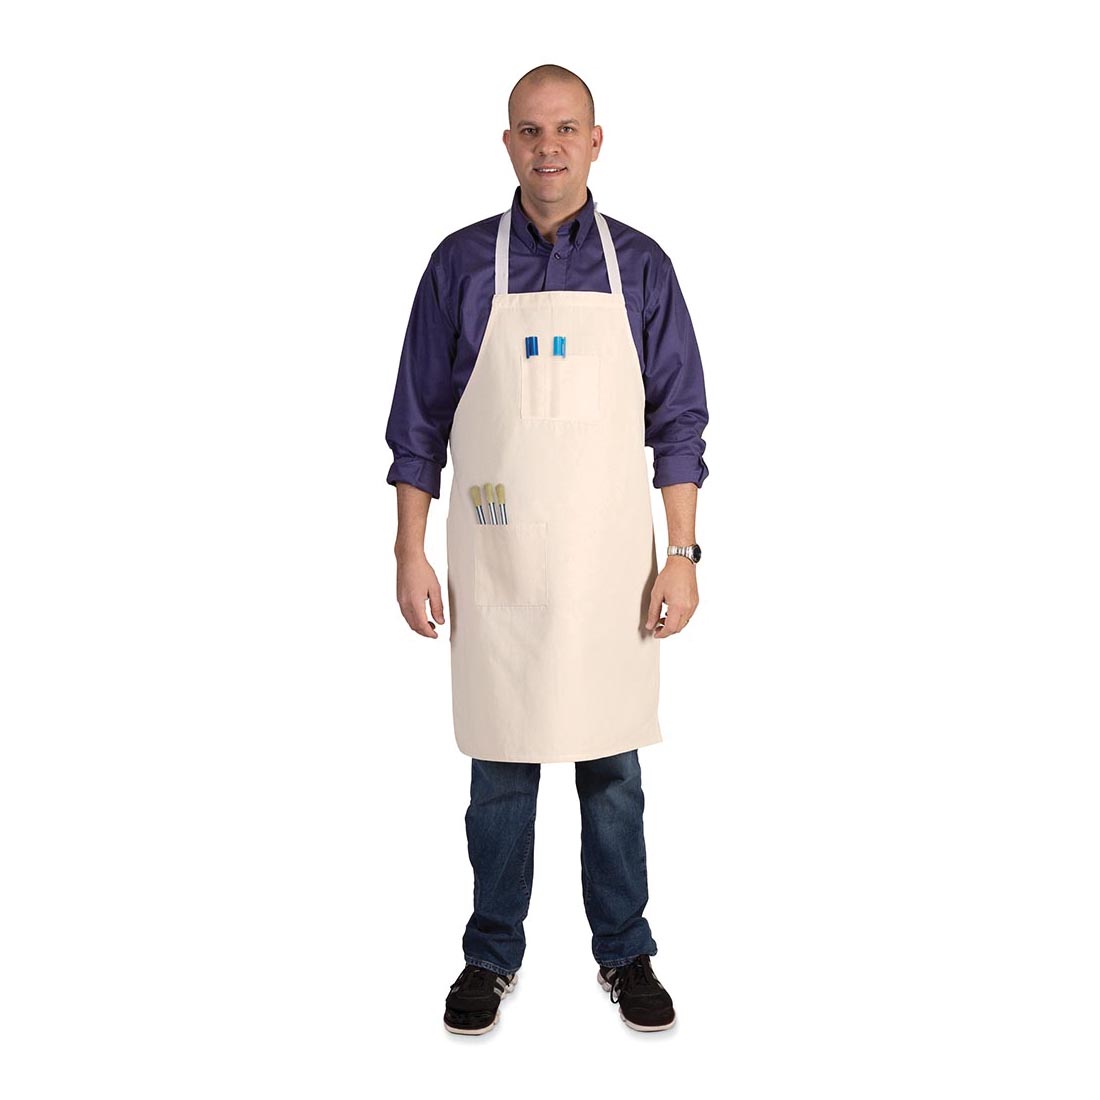 Person wearing a Creativity Street Full-Length Adult Apron